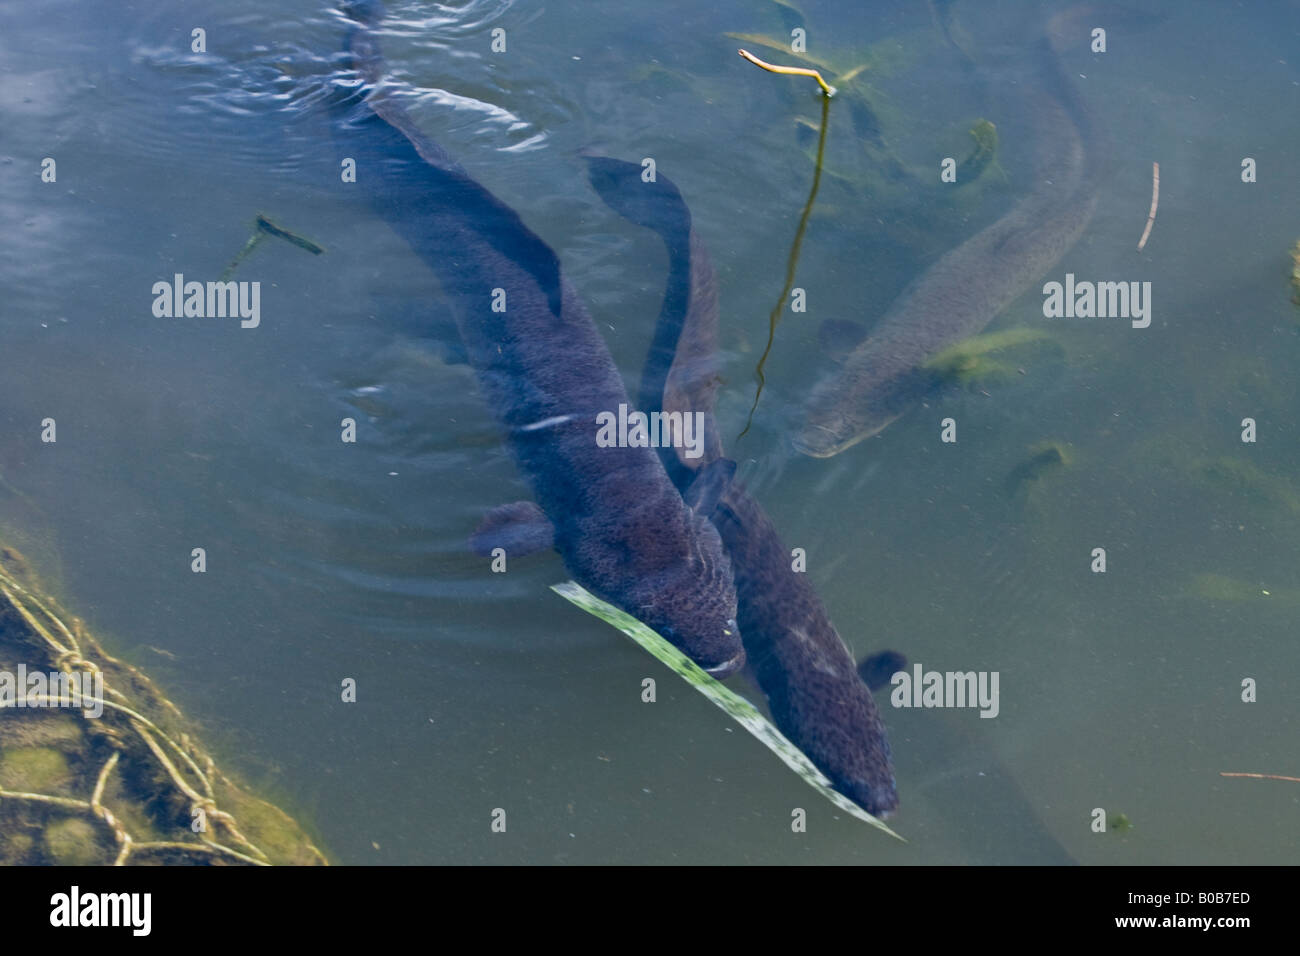 Eels swimming close to the surface in a pond Stock Photo